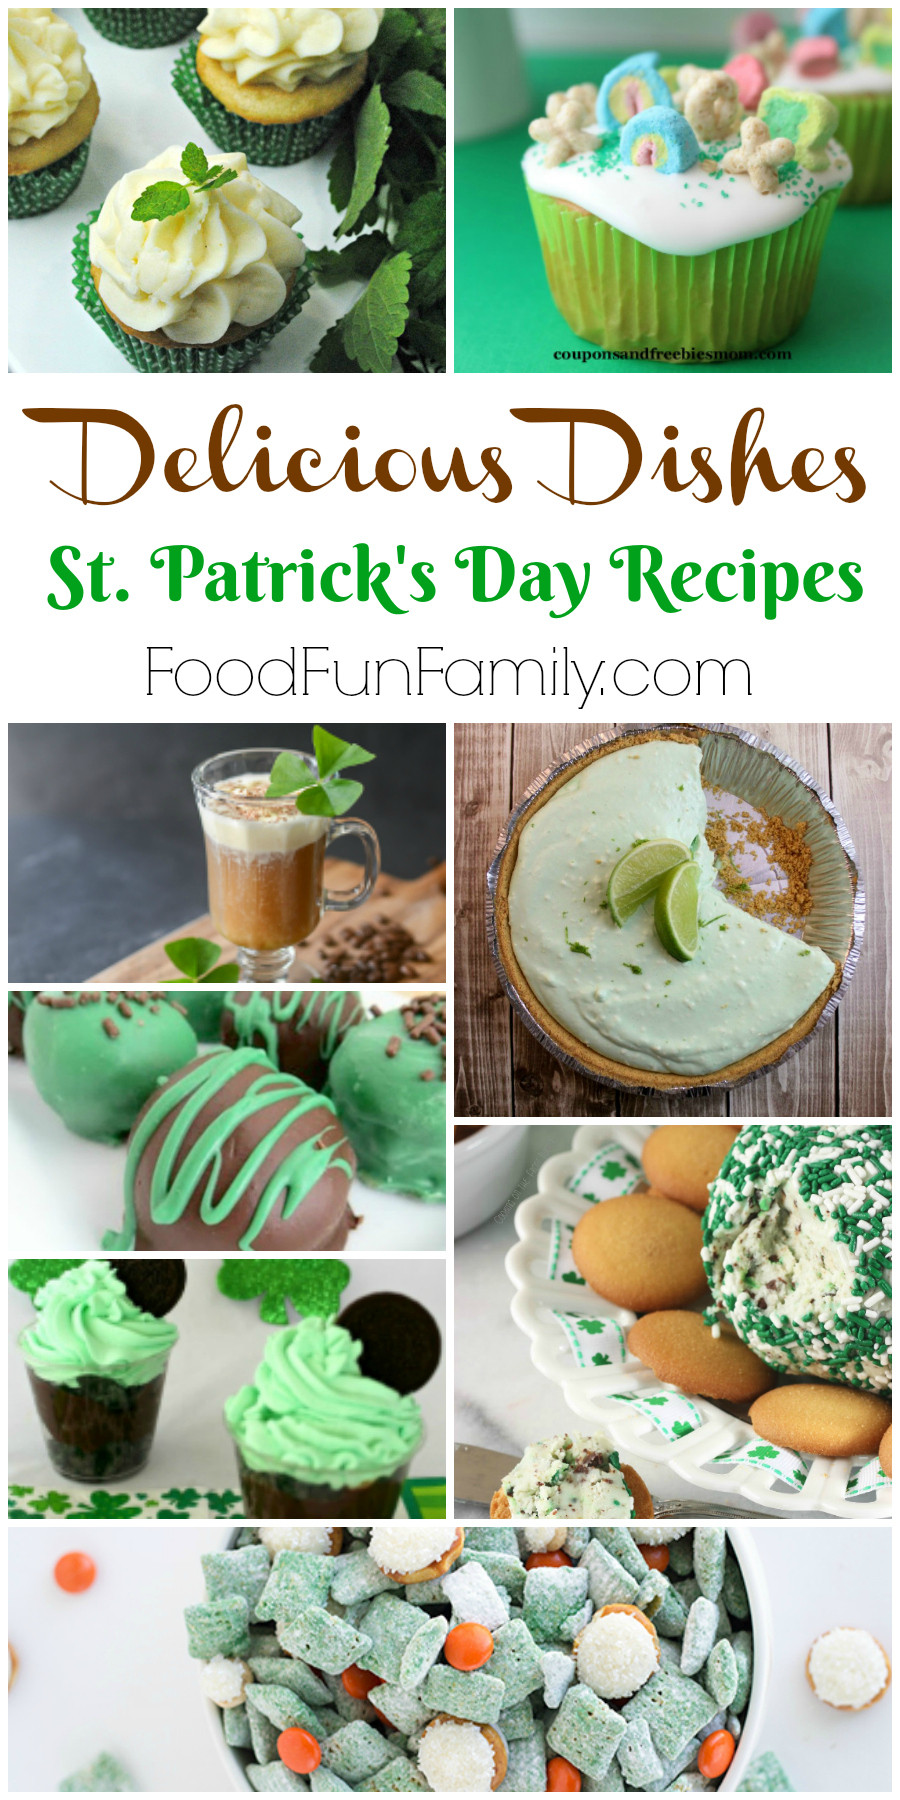 St Patrick's Day Breakfast Ideas
 Festive St Patrick’s Day Recipes – Delicious Dishes